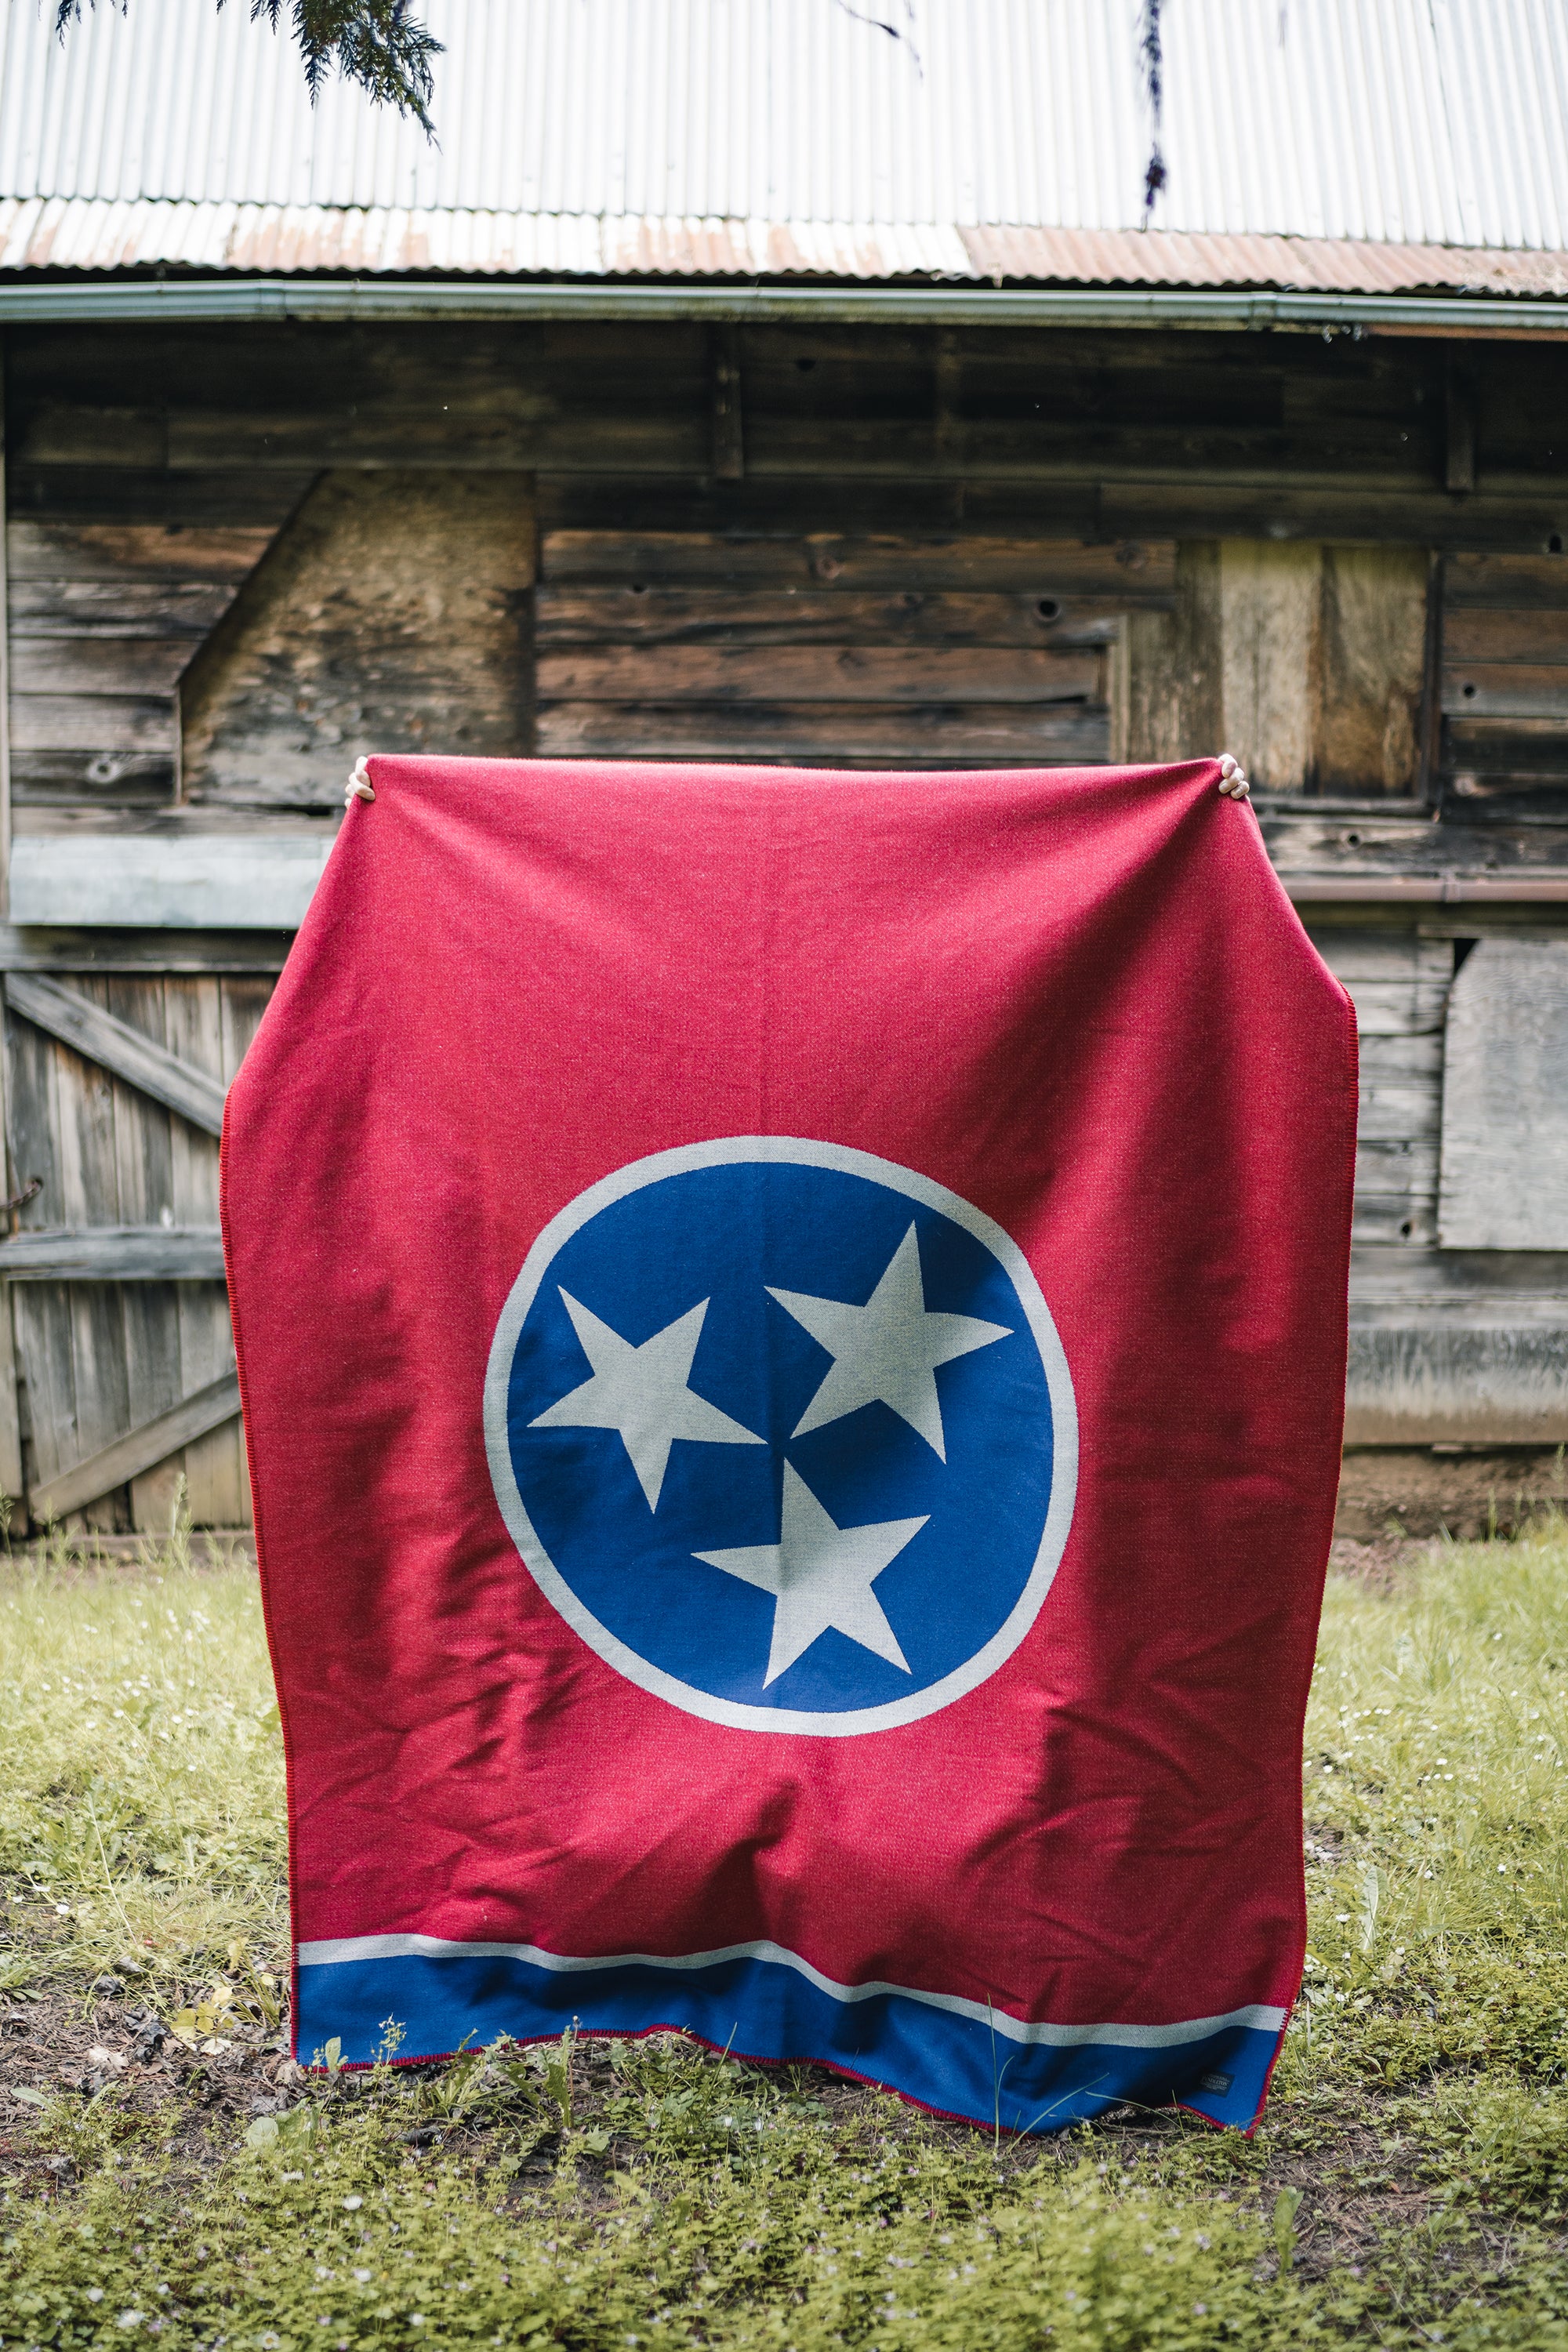 The Tennessee Blanket